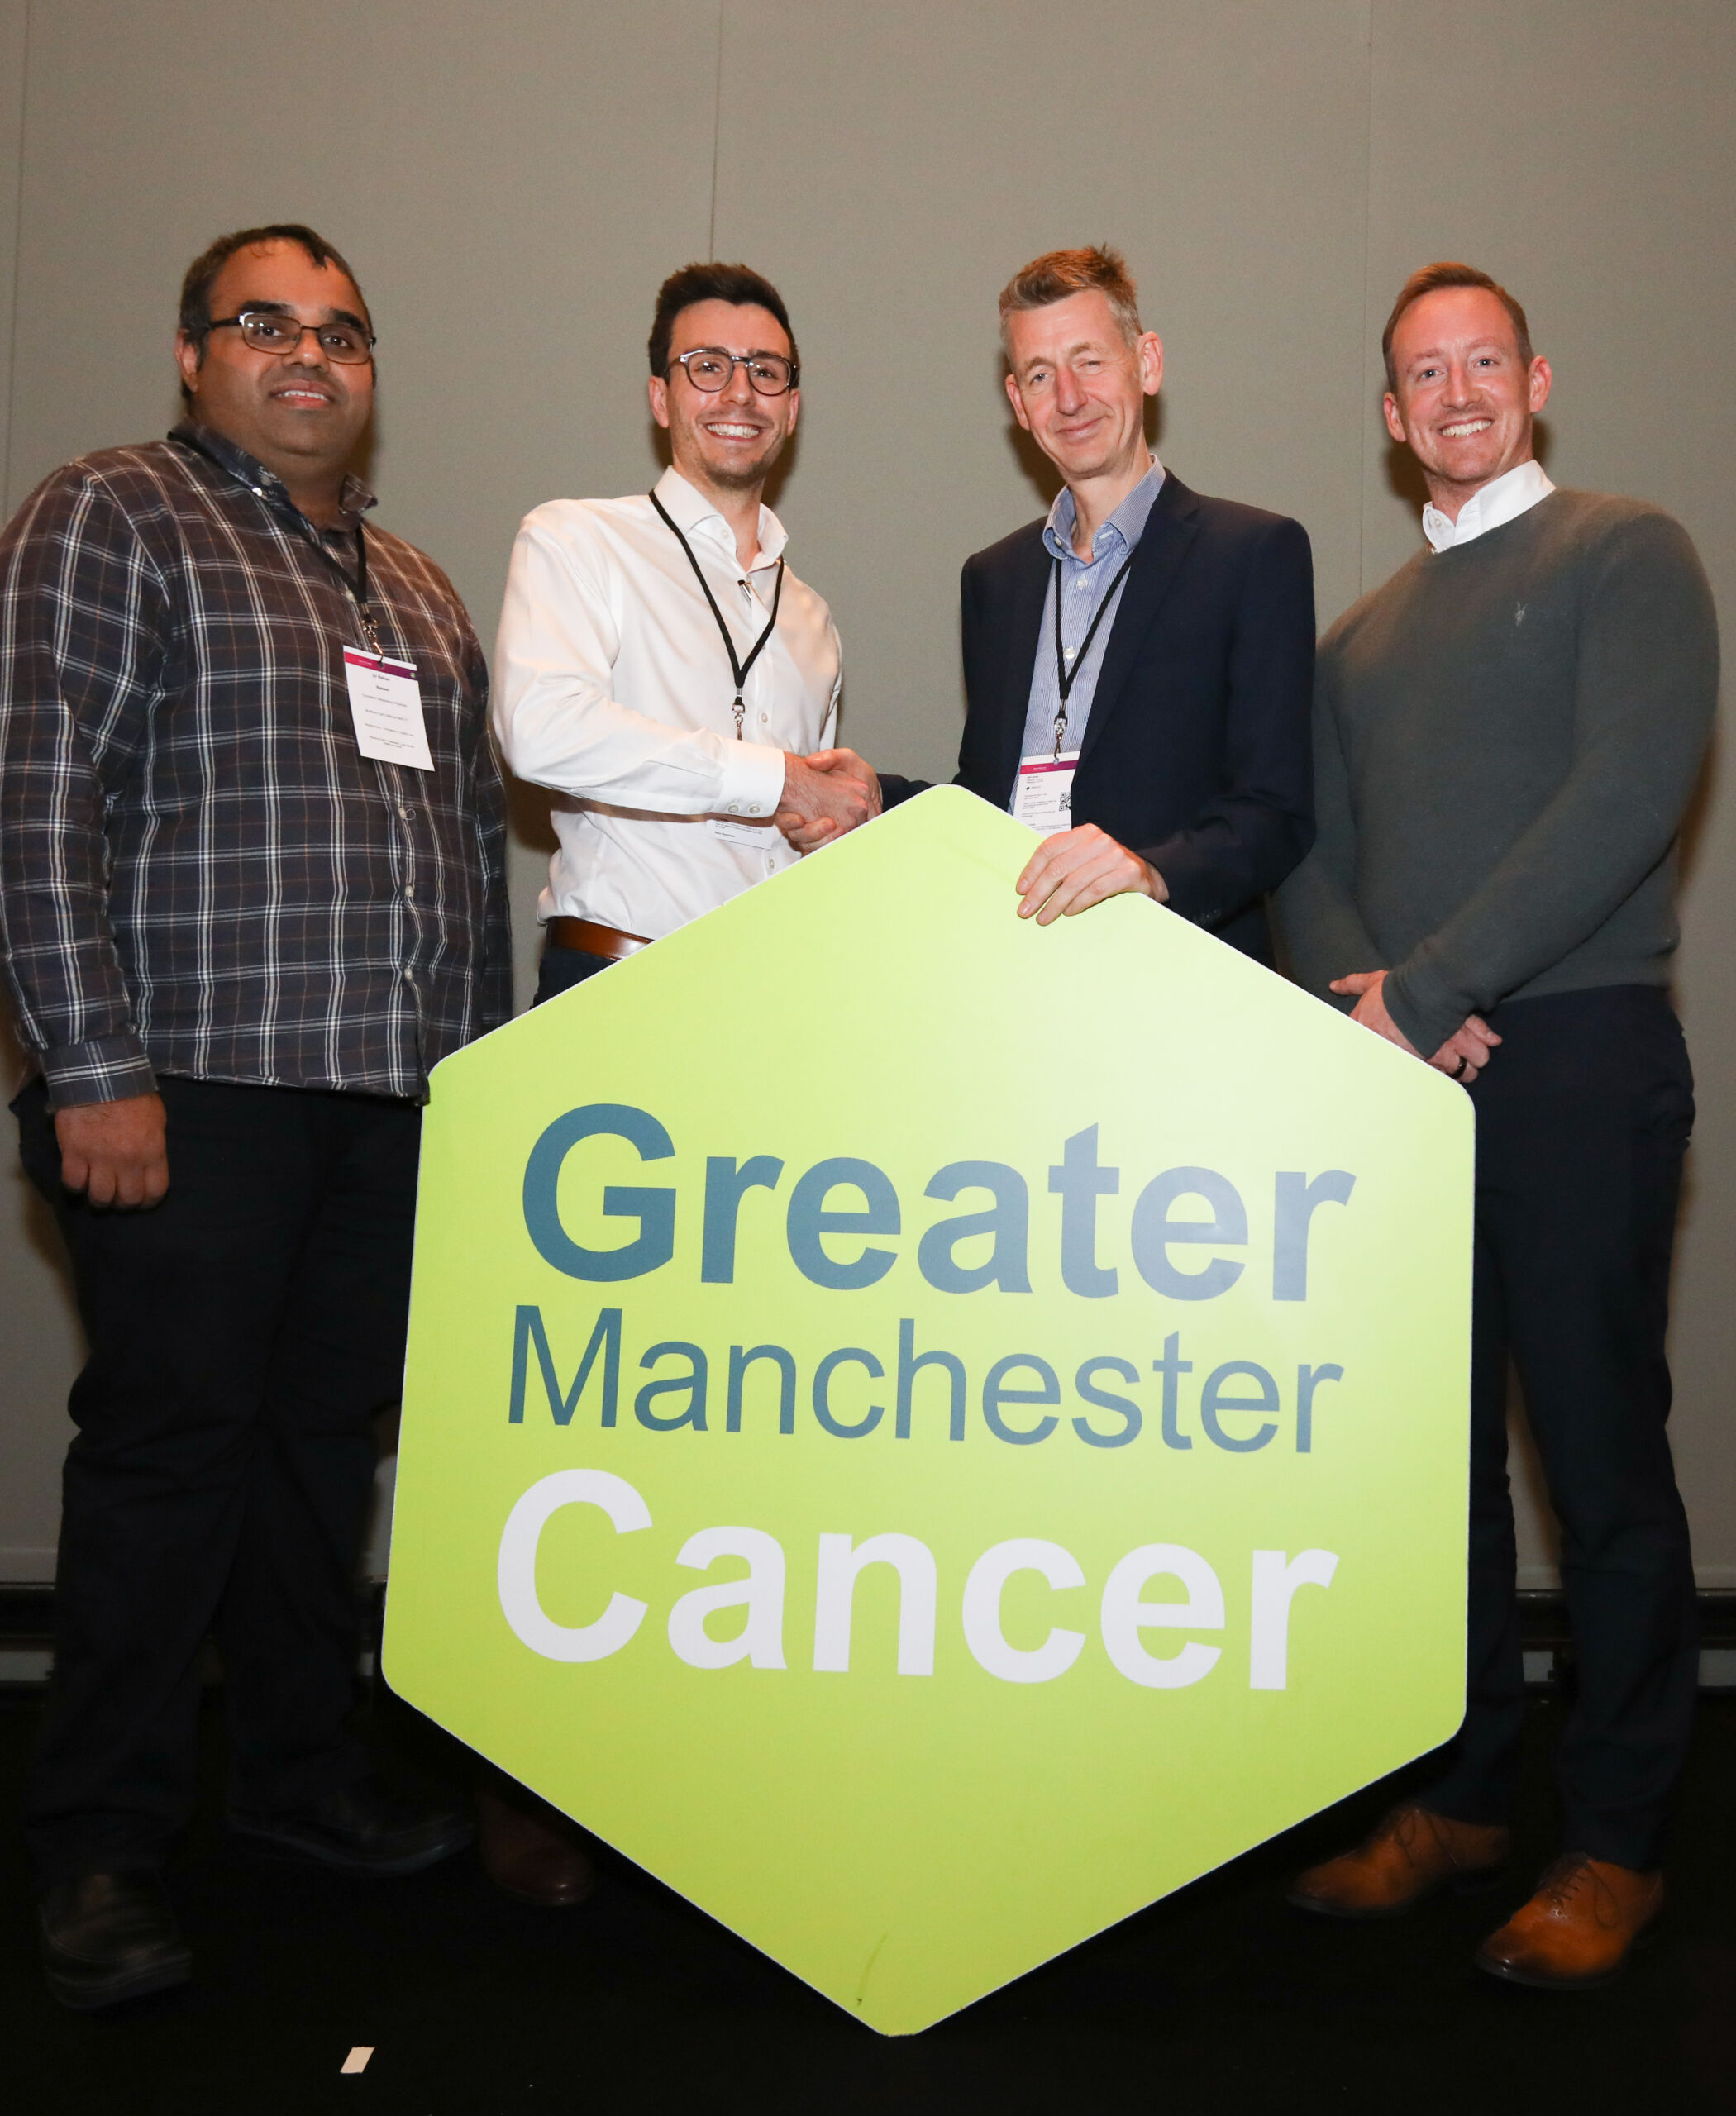 Four men stand behind a giant green hexagon with the words Greater Manchester Cancer on it. The two in the centre are shaking hands.